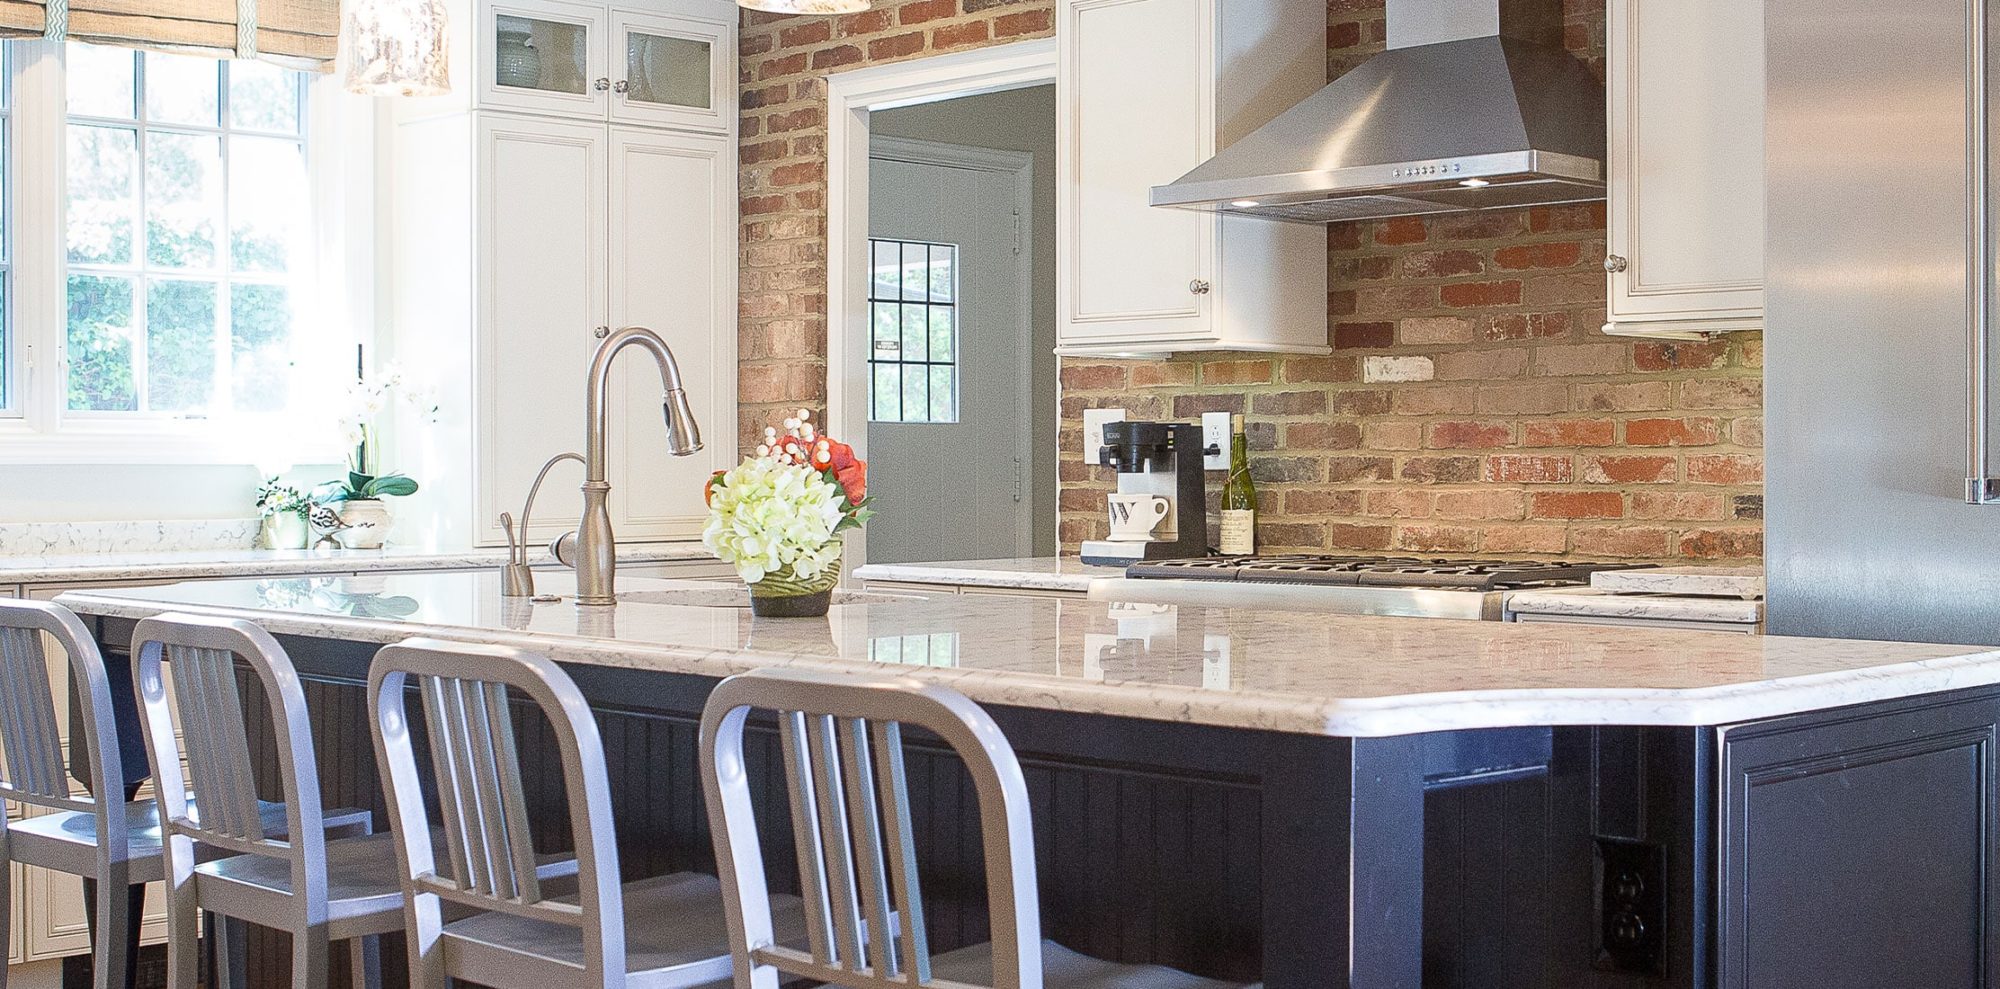 Warm marble counter tops meet brick wall in renovated kitchen